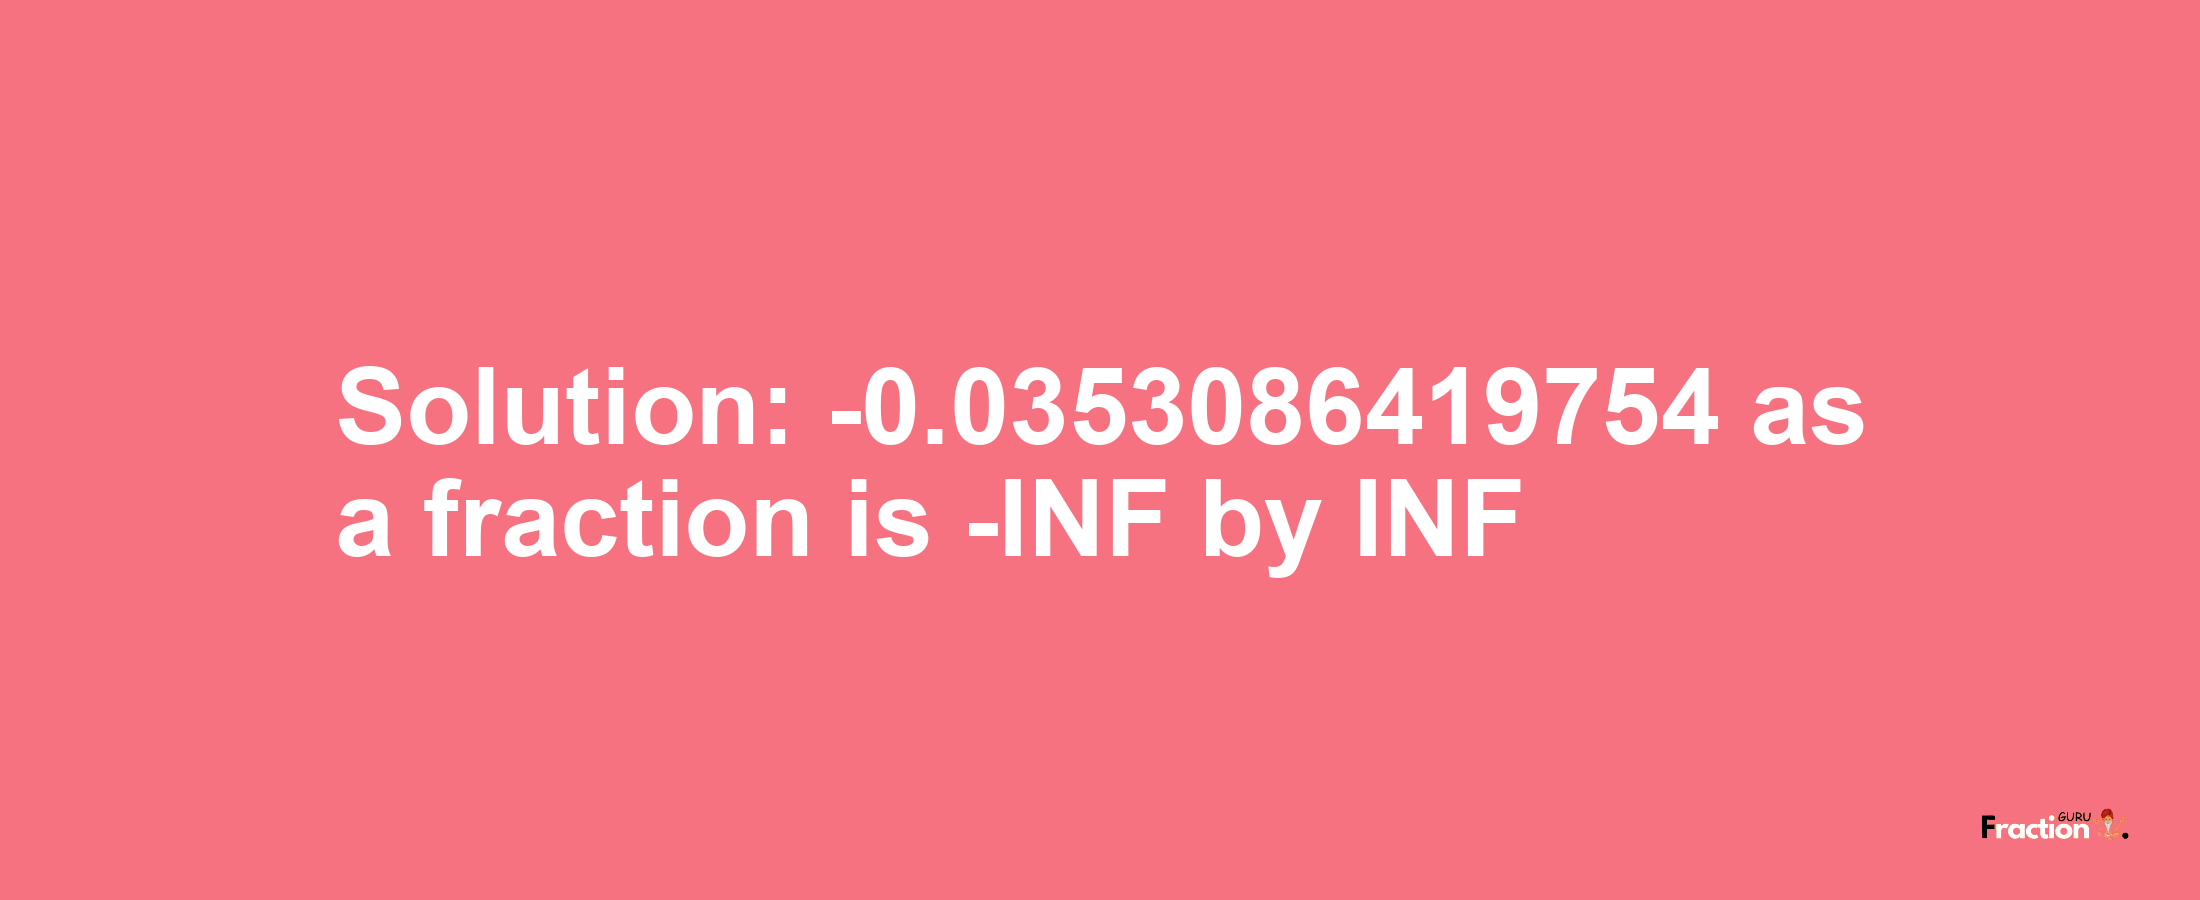 Solution:-0.0353086419754 as a fraction is -INF/INF